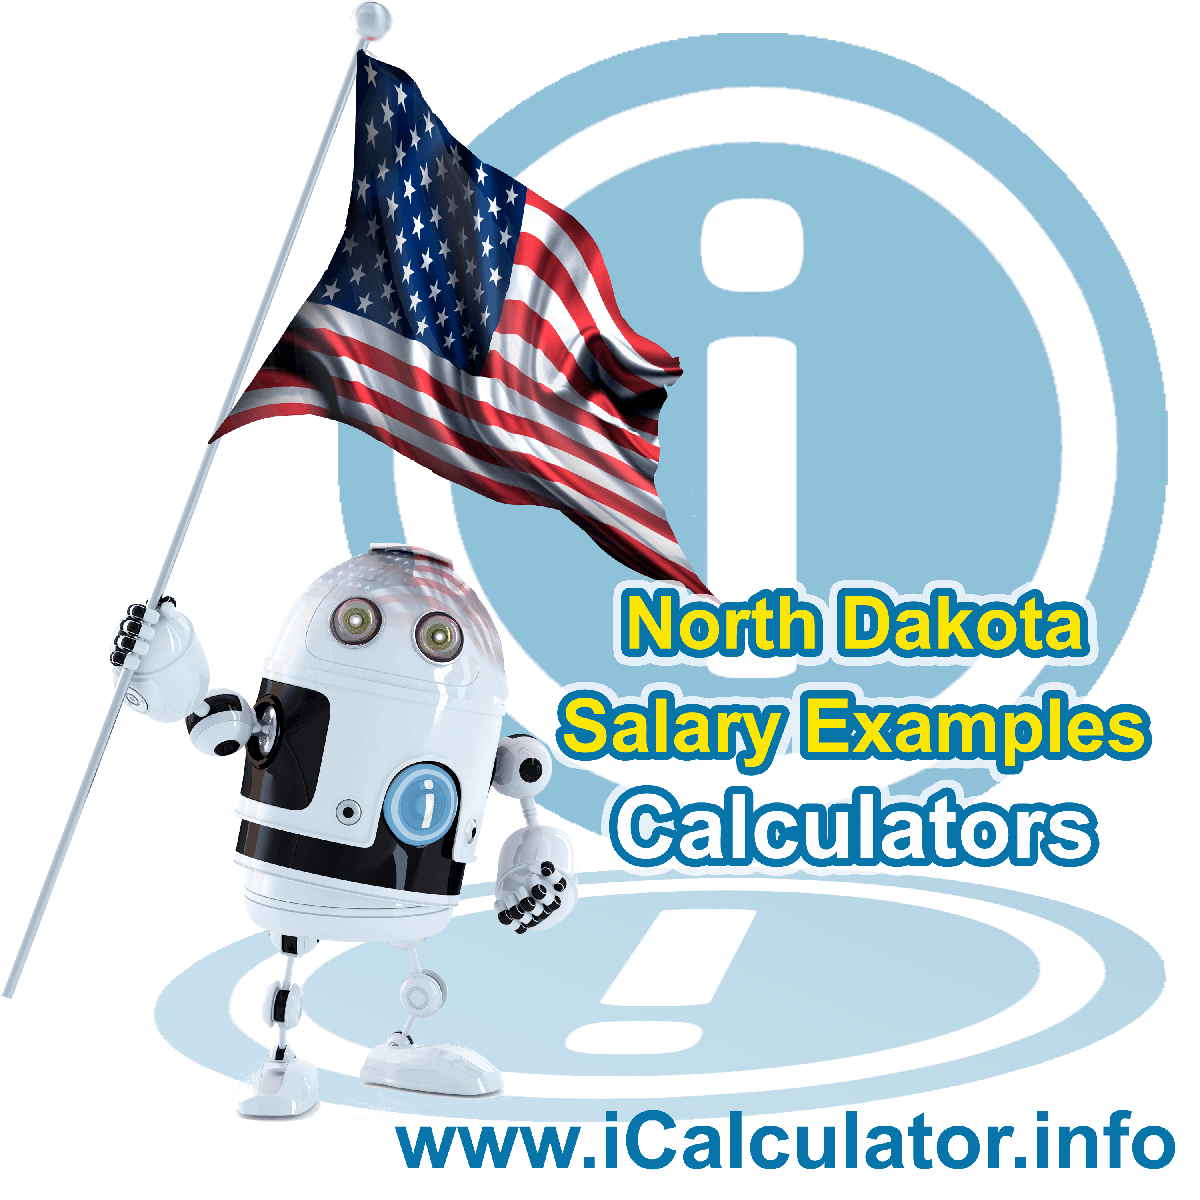 North Dakota Salary Example for $ 130,000.00 in 2023 | iCalculator™ | $ 130,000.00 salary example for employee and employer paying North Dakota State tincome taxes. Detailed salary after tax calculation including North Dakota State Tax, Federal State Tax, Medicare Deductions, Social Security, Capital Gains and other income tax and salary deductions complete with supporting North Dakota state tax tables 